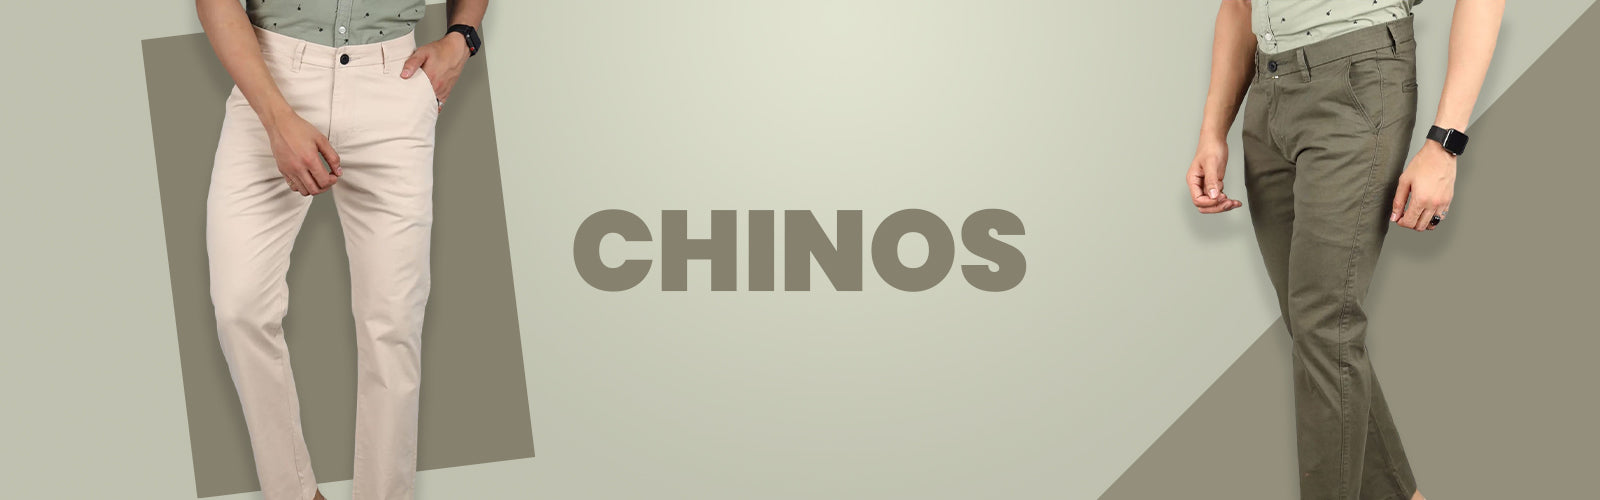 15 Different Types of Chinos for Men and Women